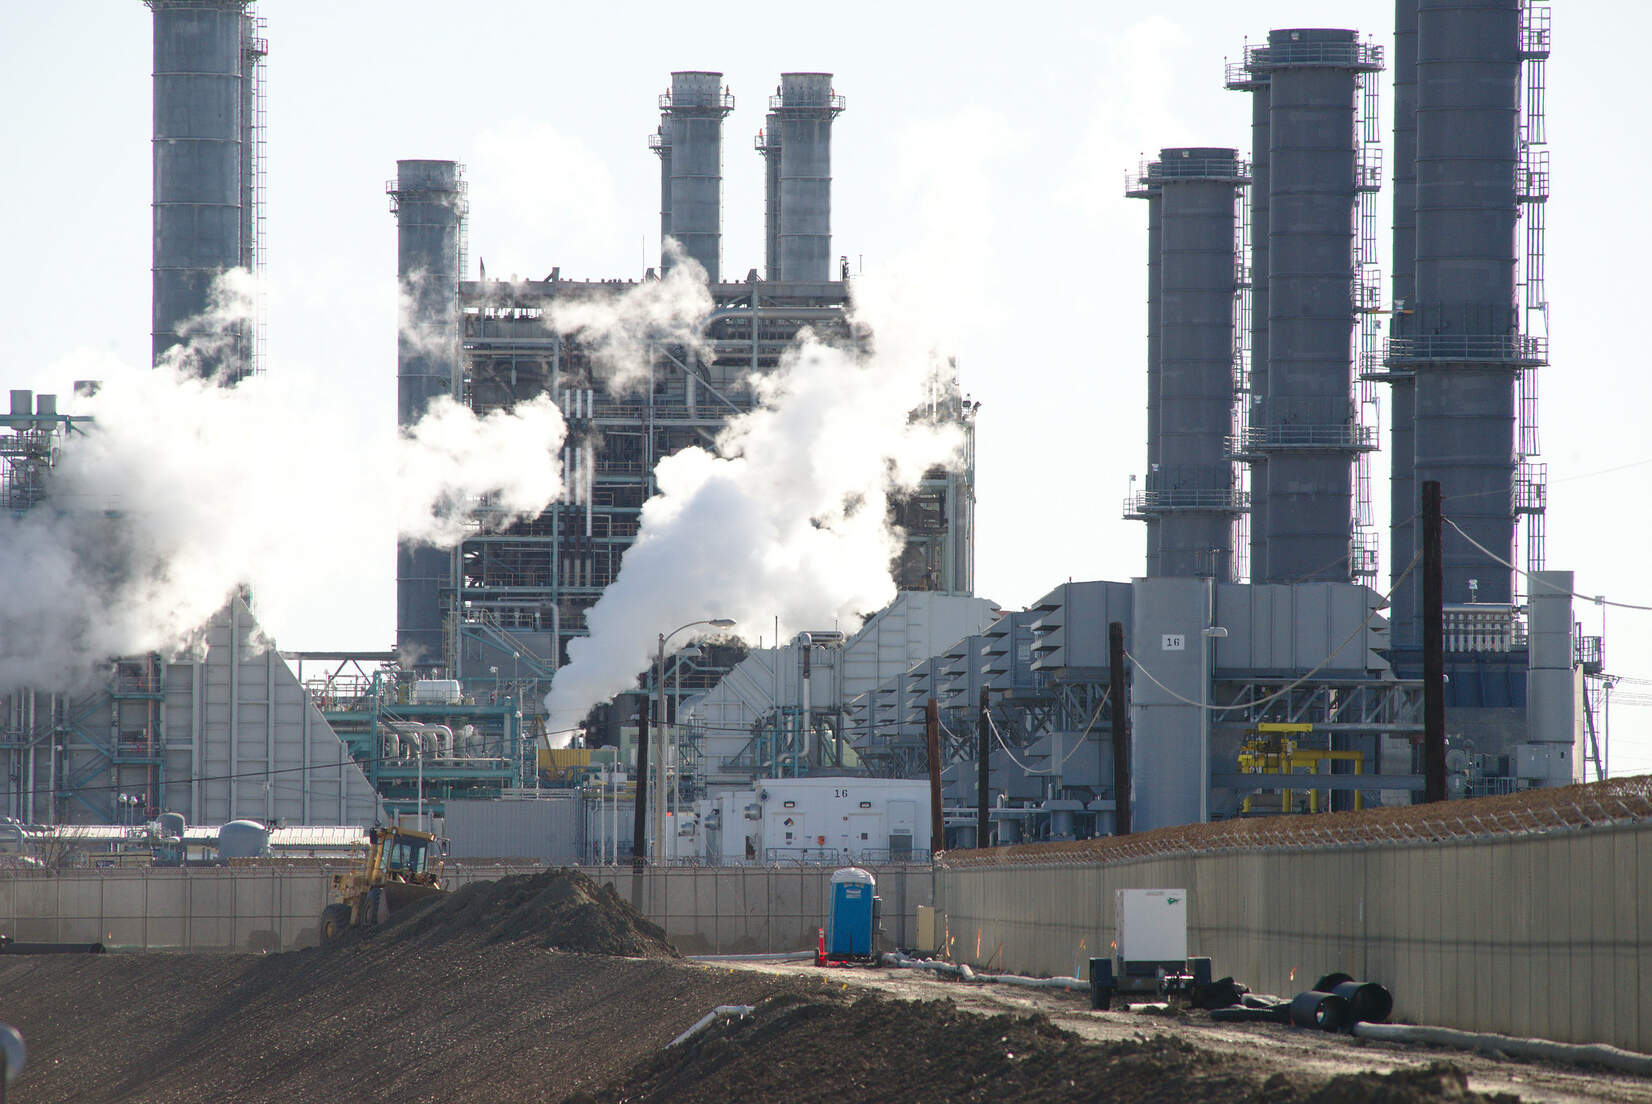 carbon capture companies publicly traded